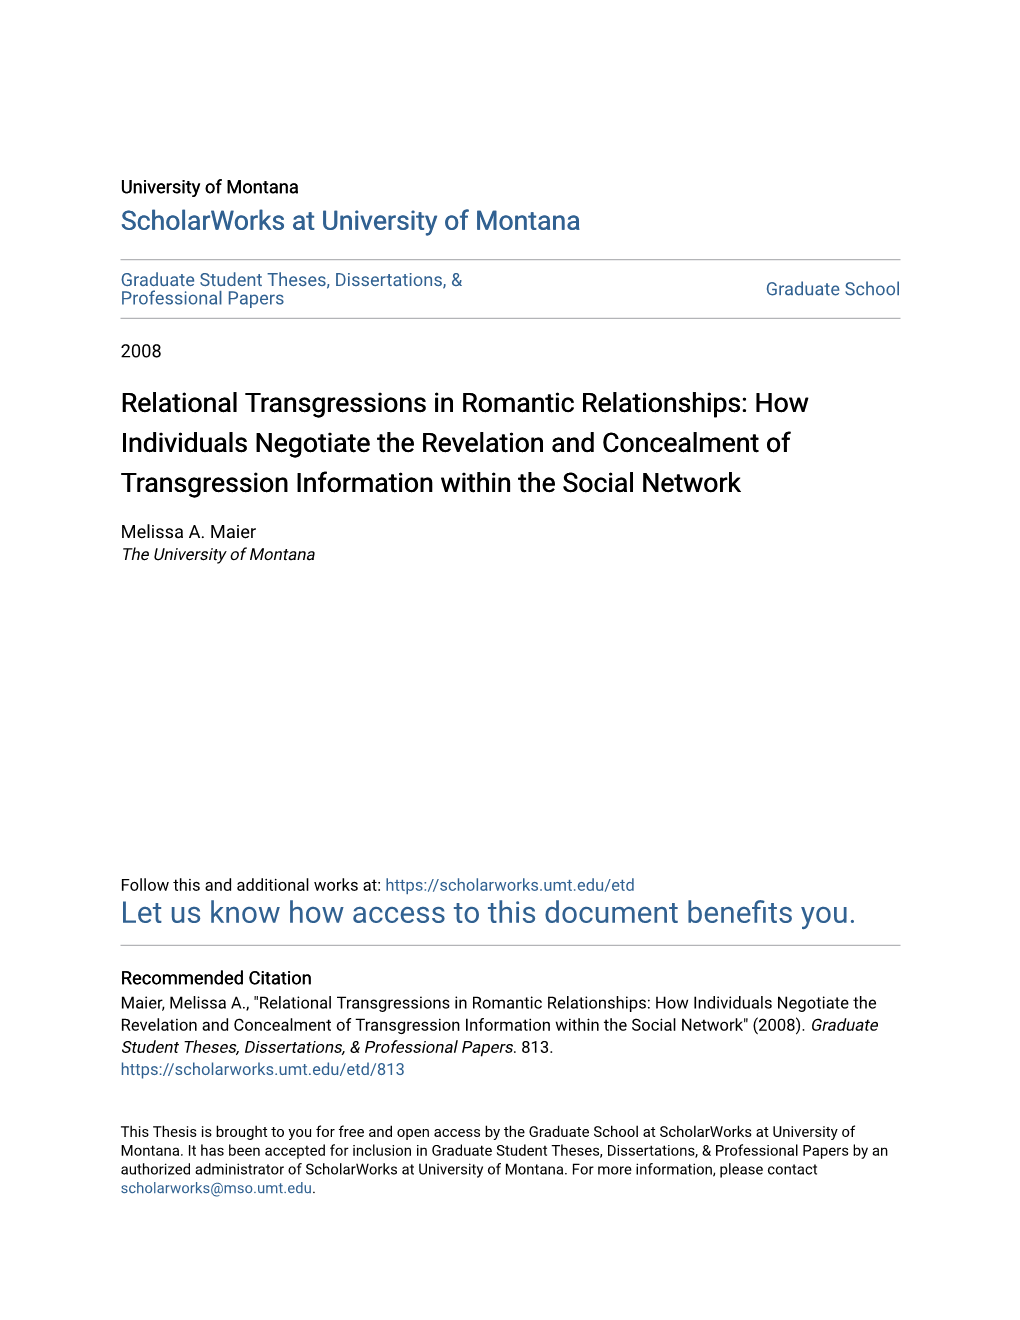 How Individuals Negotiate the Revelation and Concealment of Transgression Information Within the Social Network